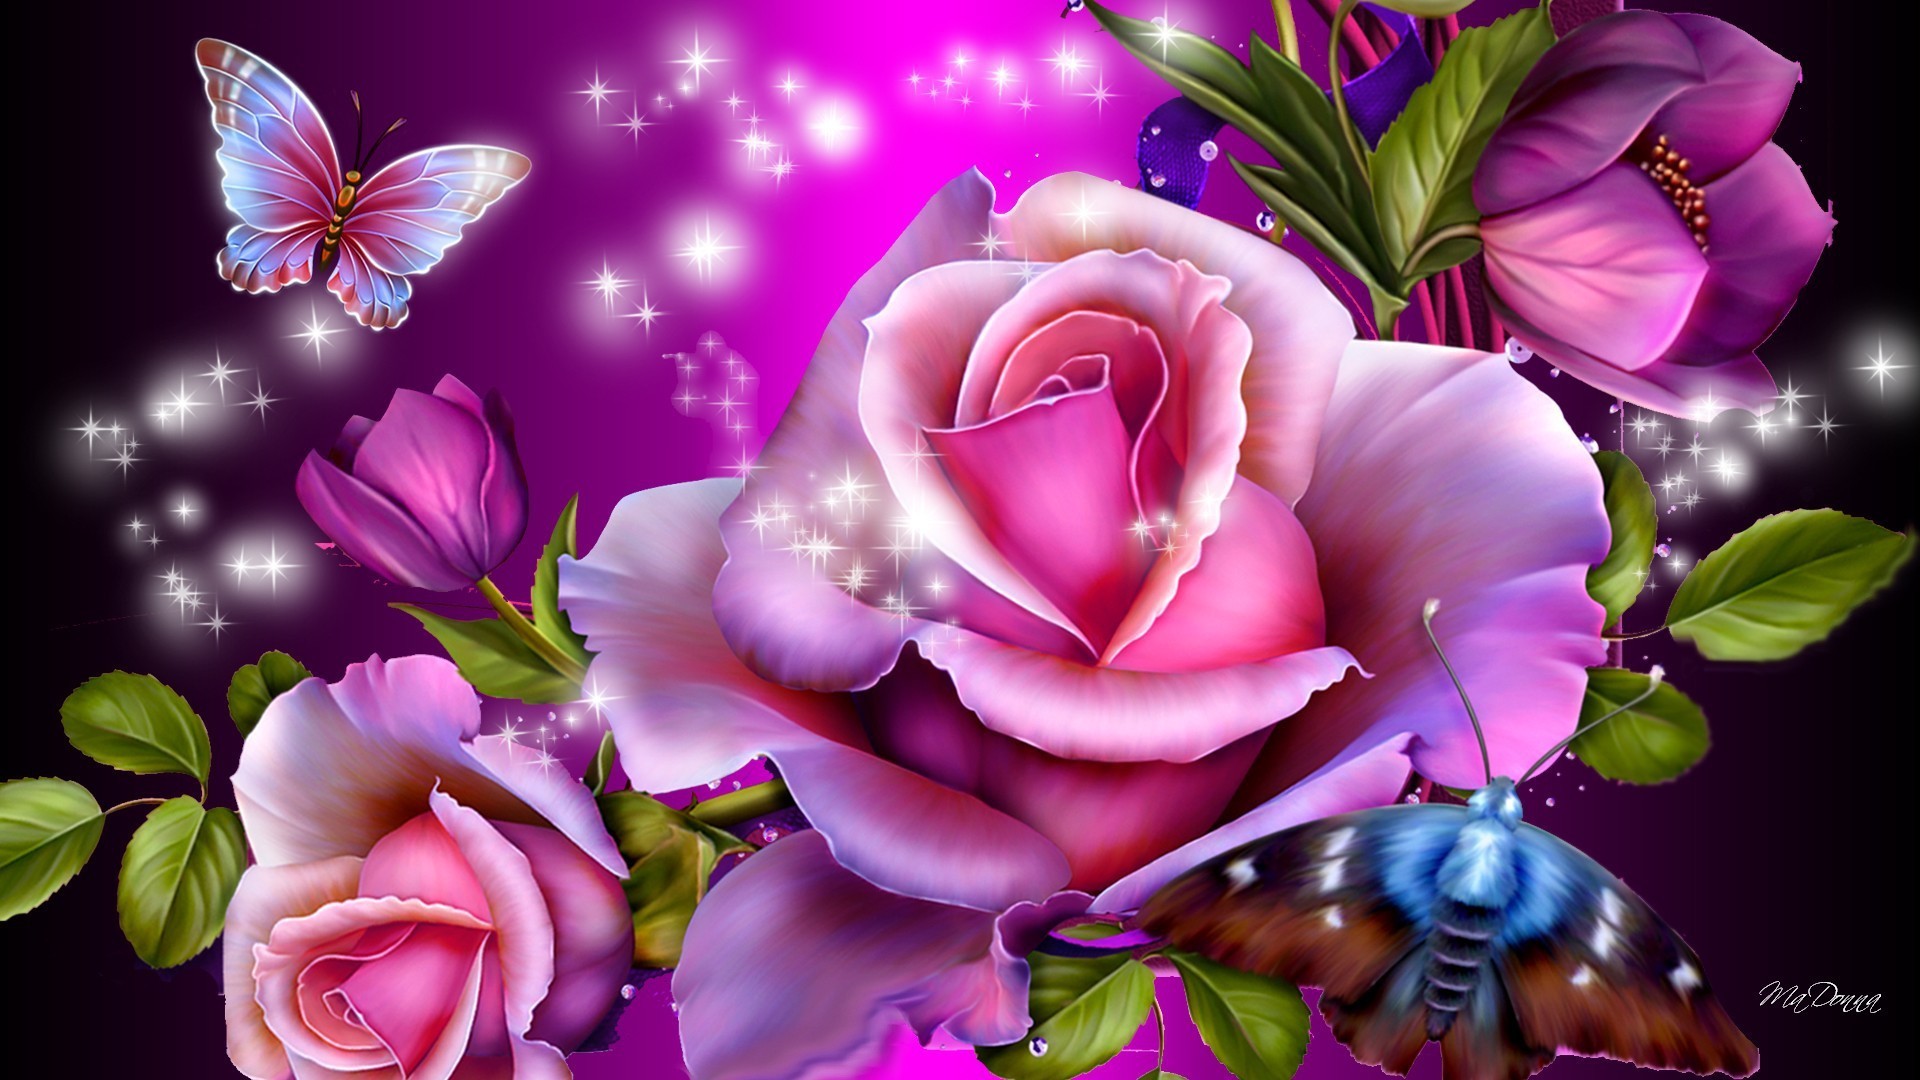 1920x1080  Beautiful purple rose on the table wallpapers and images  wallpapers 